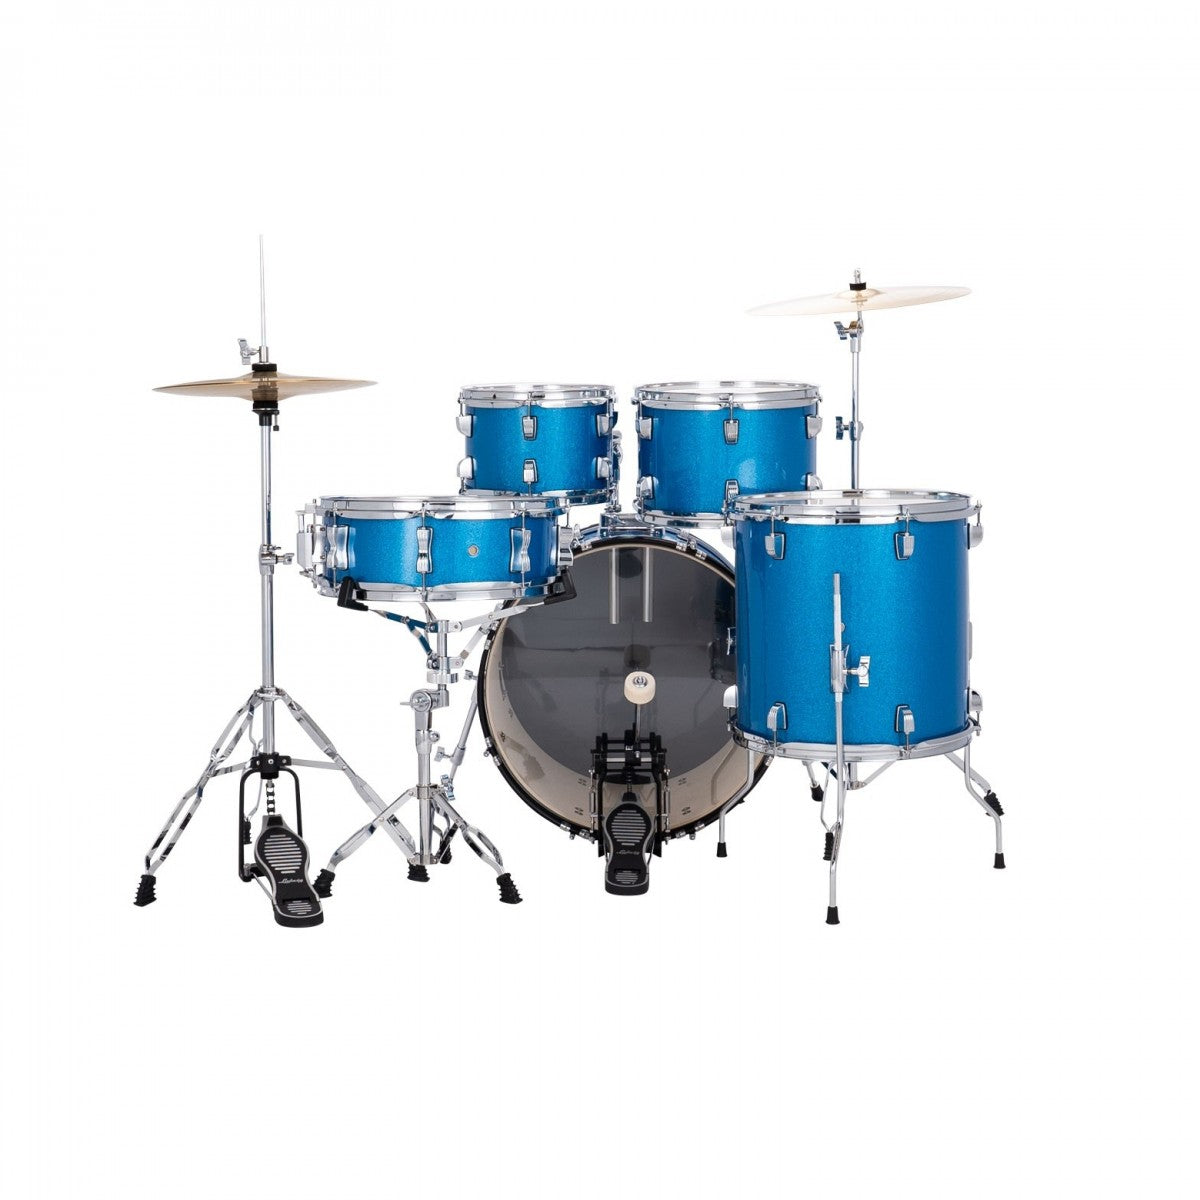 Trống Cơ Ludwig Accent Drive LC195 (22/10-12/16/14 + Hardware + Cymbal) - Việt Music